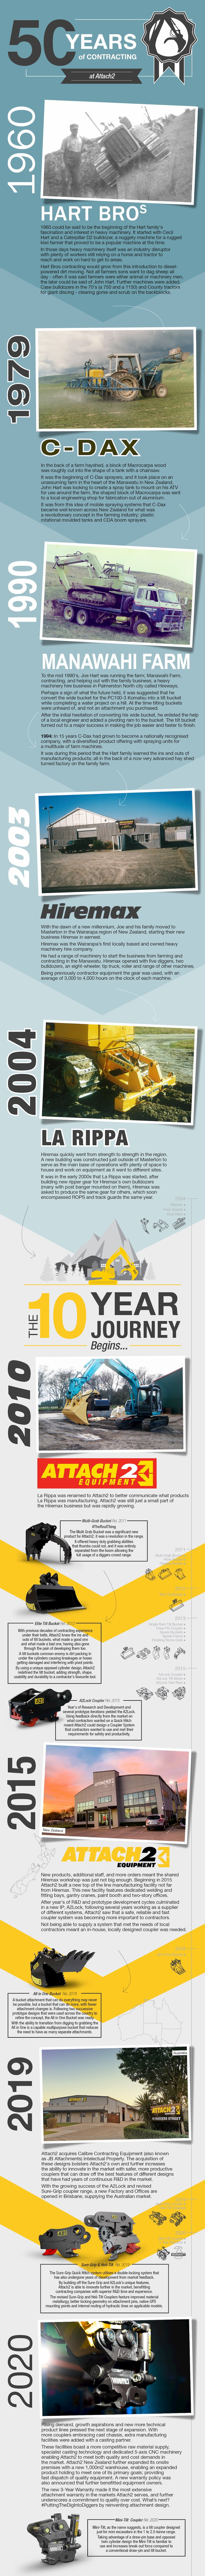 50 years of Contracting - 10 Years of Attach2 - History Infographic